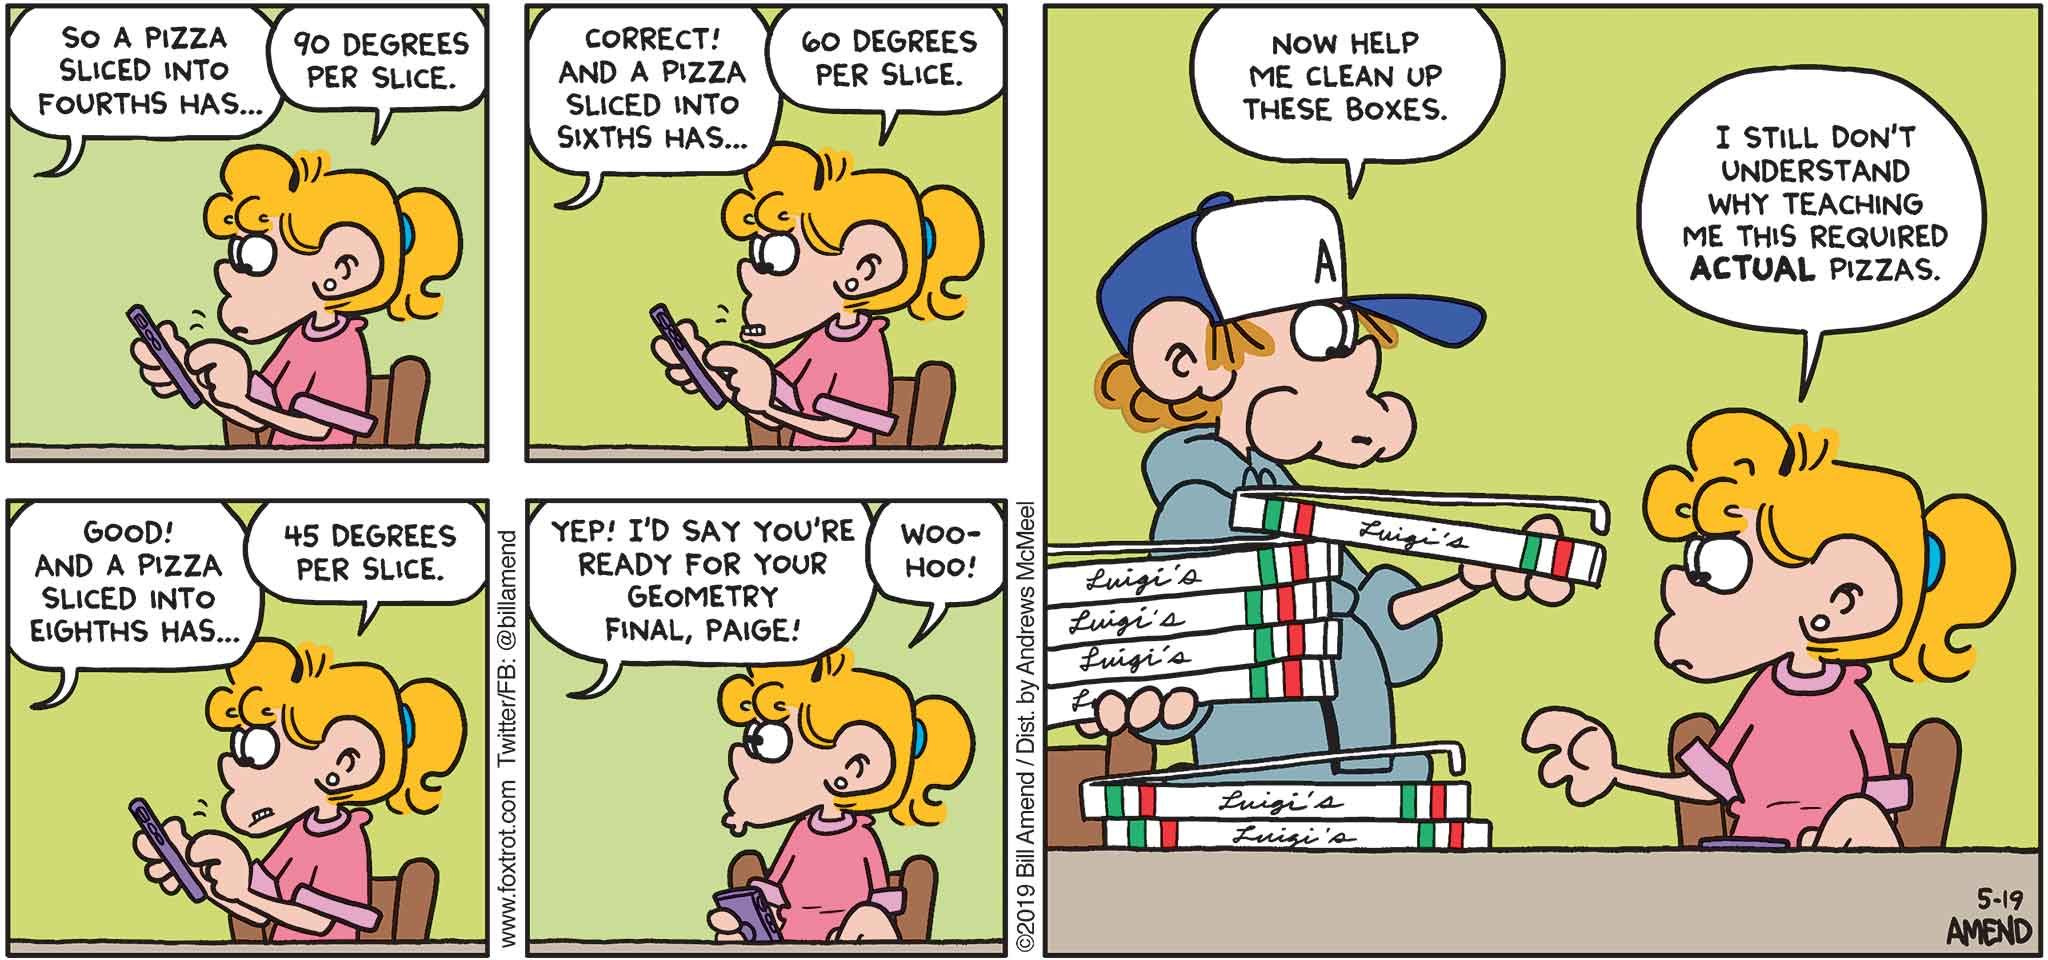 FoxTrot by Bill Amend - "Study Aids" published May 19, 2019 - Peter: So a pizza sliced into fourths has... Paige: 90 degrees per slice. Peter: Correct! And a pizza sliced into sixths has... Paige: 60 degrees per slice. Peter: Good! And a pizza sliced into eights has... Paige: 45 degrees per slice. Peter: Yep! I'd say you're ready for your geometry final, Paige! Paige: Woohoo! Peter: Now help me clean up these boxes. Paige: I still don't understand why teaching me this required actual pizzas.